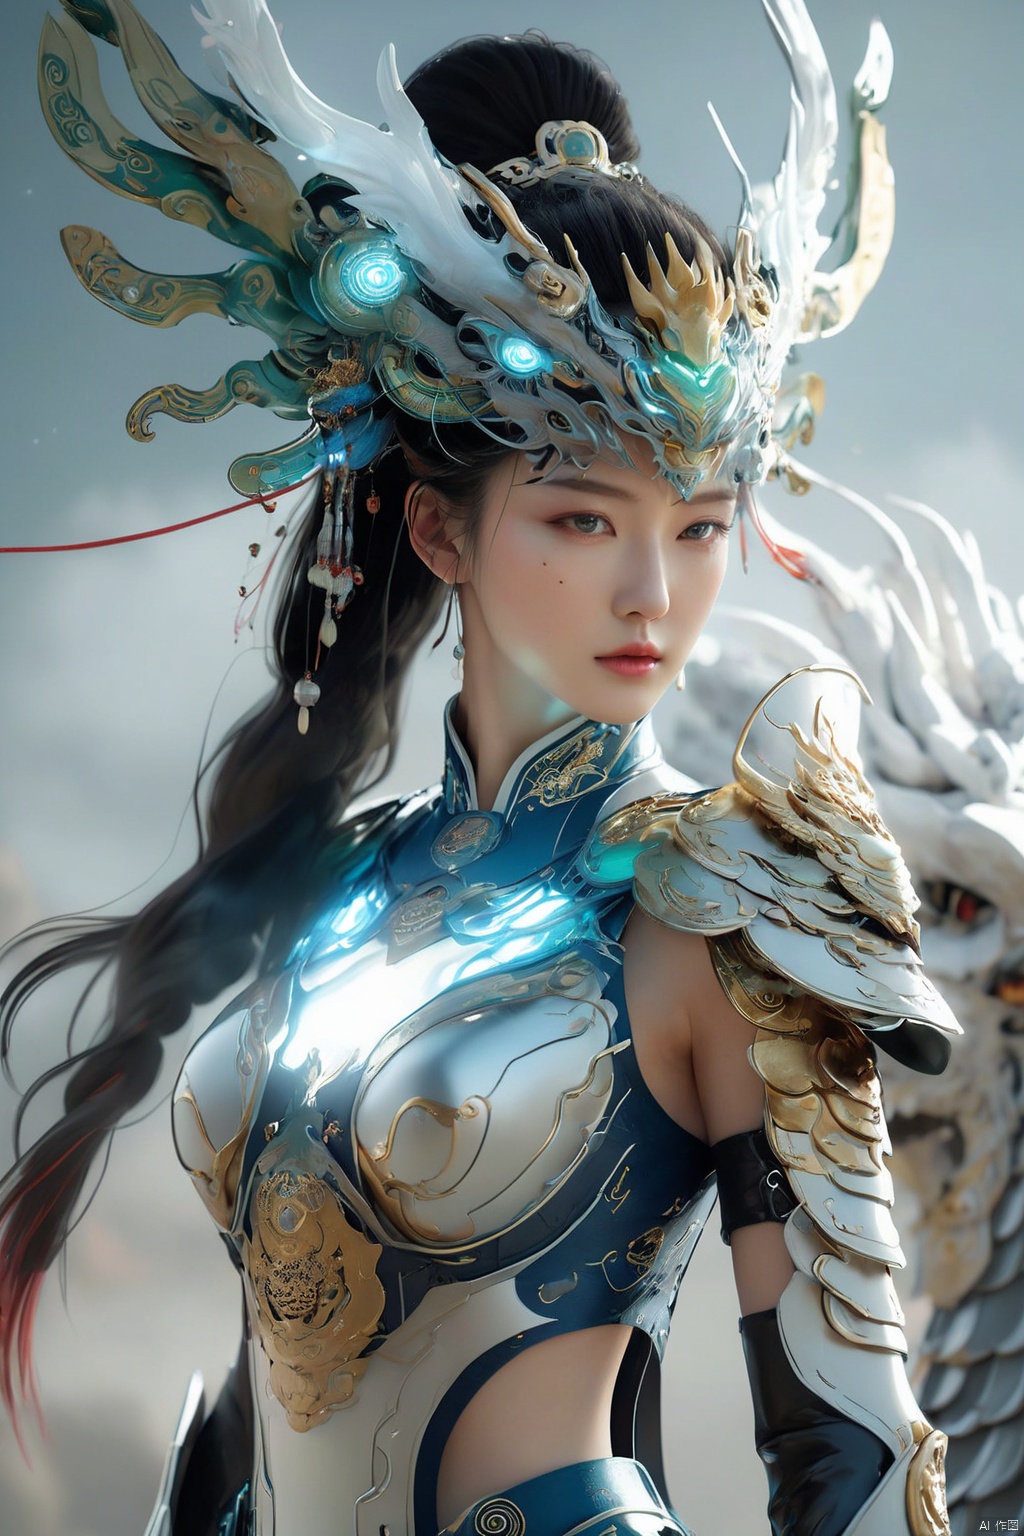 32K ultra-high resolution, full-body portrait of a classical female mech-warrior, integrating seamlessly Tang Dynasty armor with futuristic elements, adorned with glowing Yunlong (cloud dragon) and Taotie (beast face) motifs, constructed with advanced sci-fi materials, rendered in Unreal Engine for hyperrealistic detail, merging realism with surrealistic touches